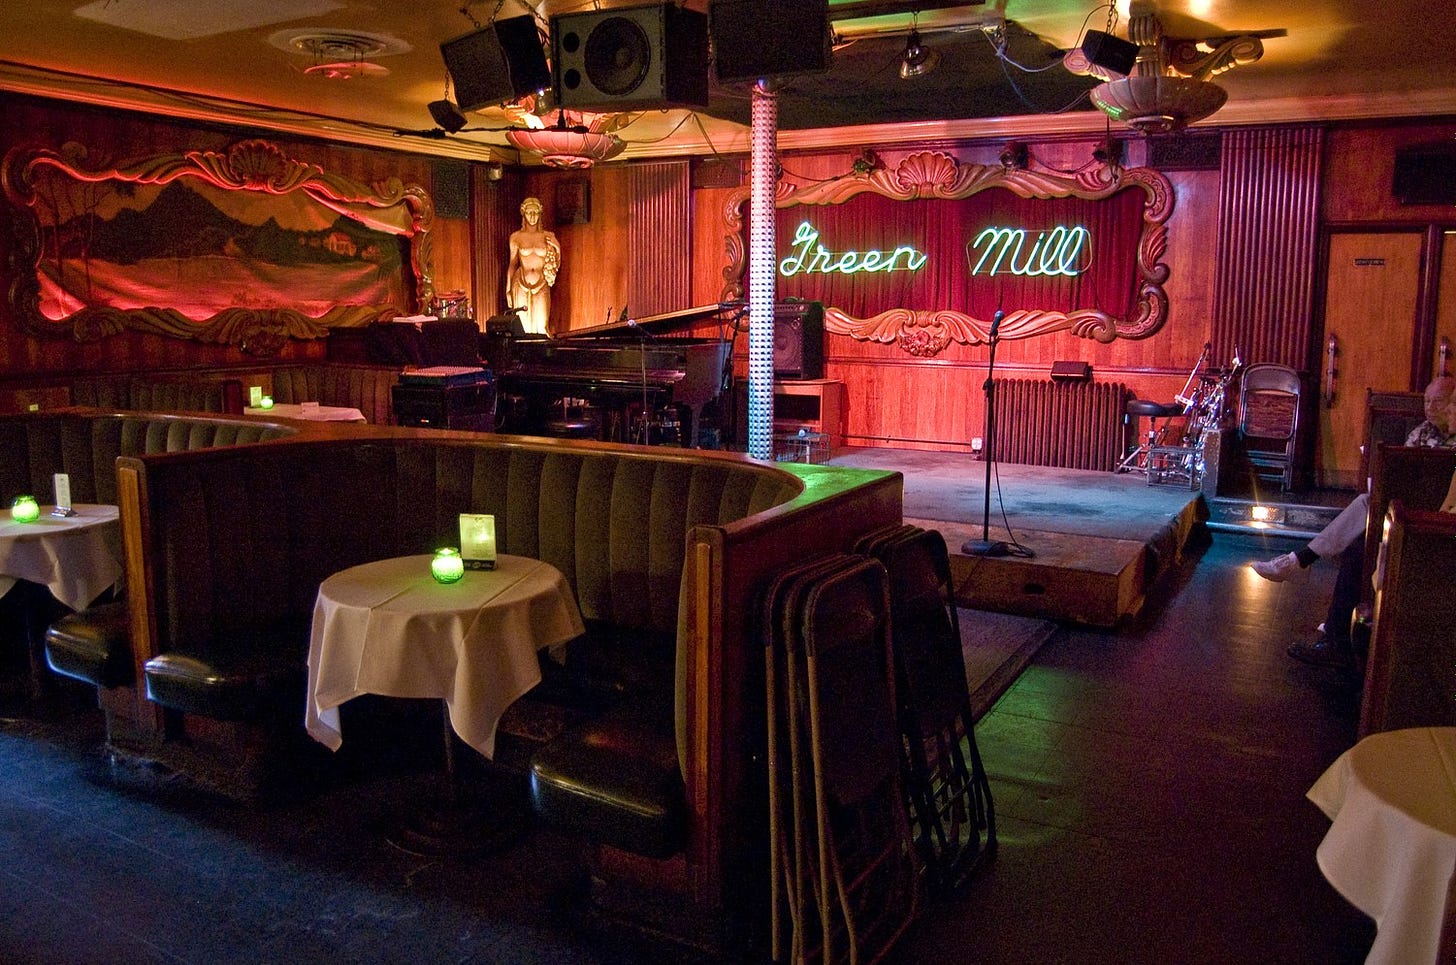 A view inside a nearly empty Prohibition-era night club, with U-shaped padded booths facing away from a small stage.